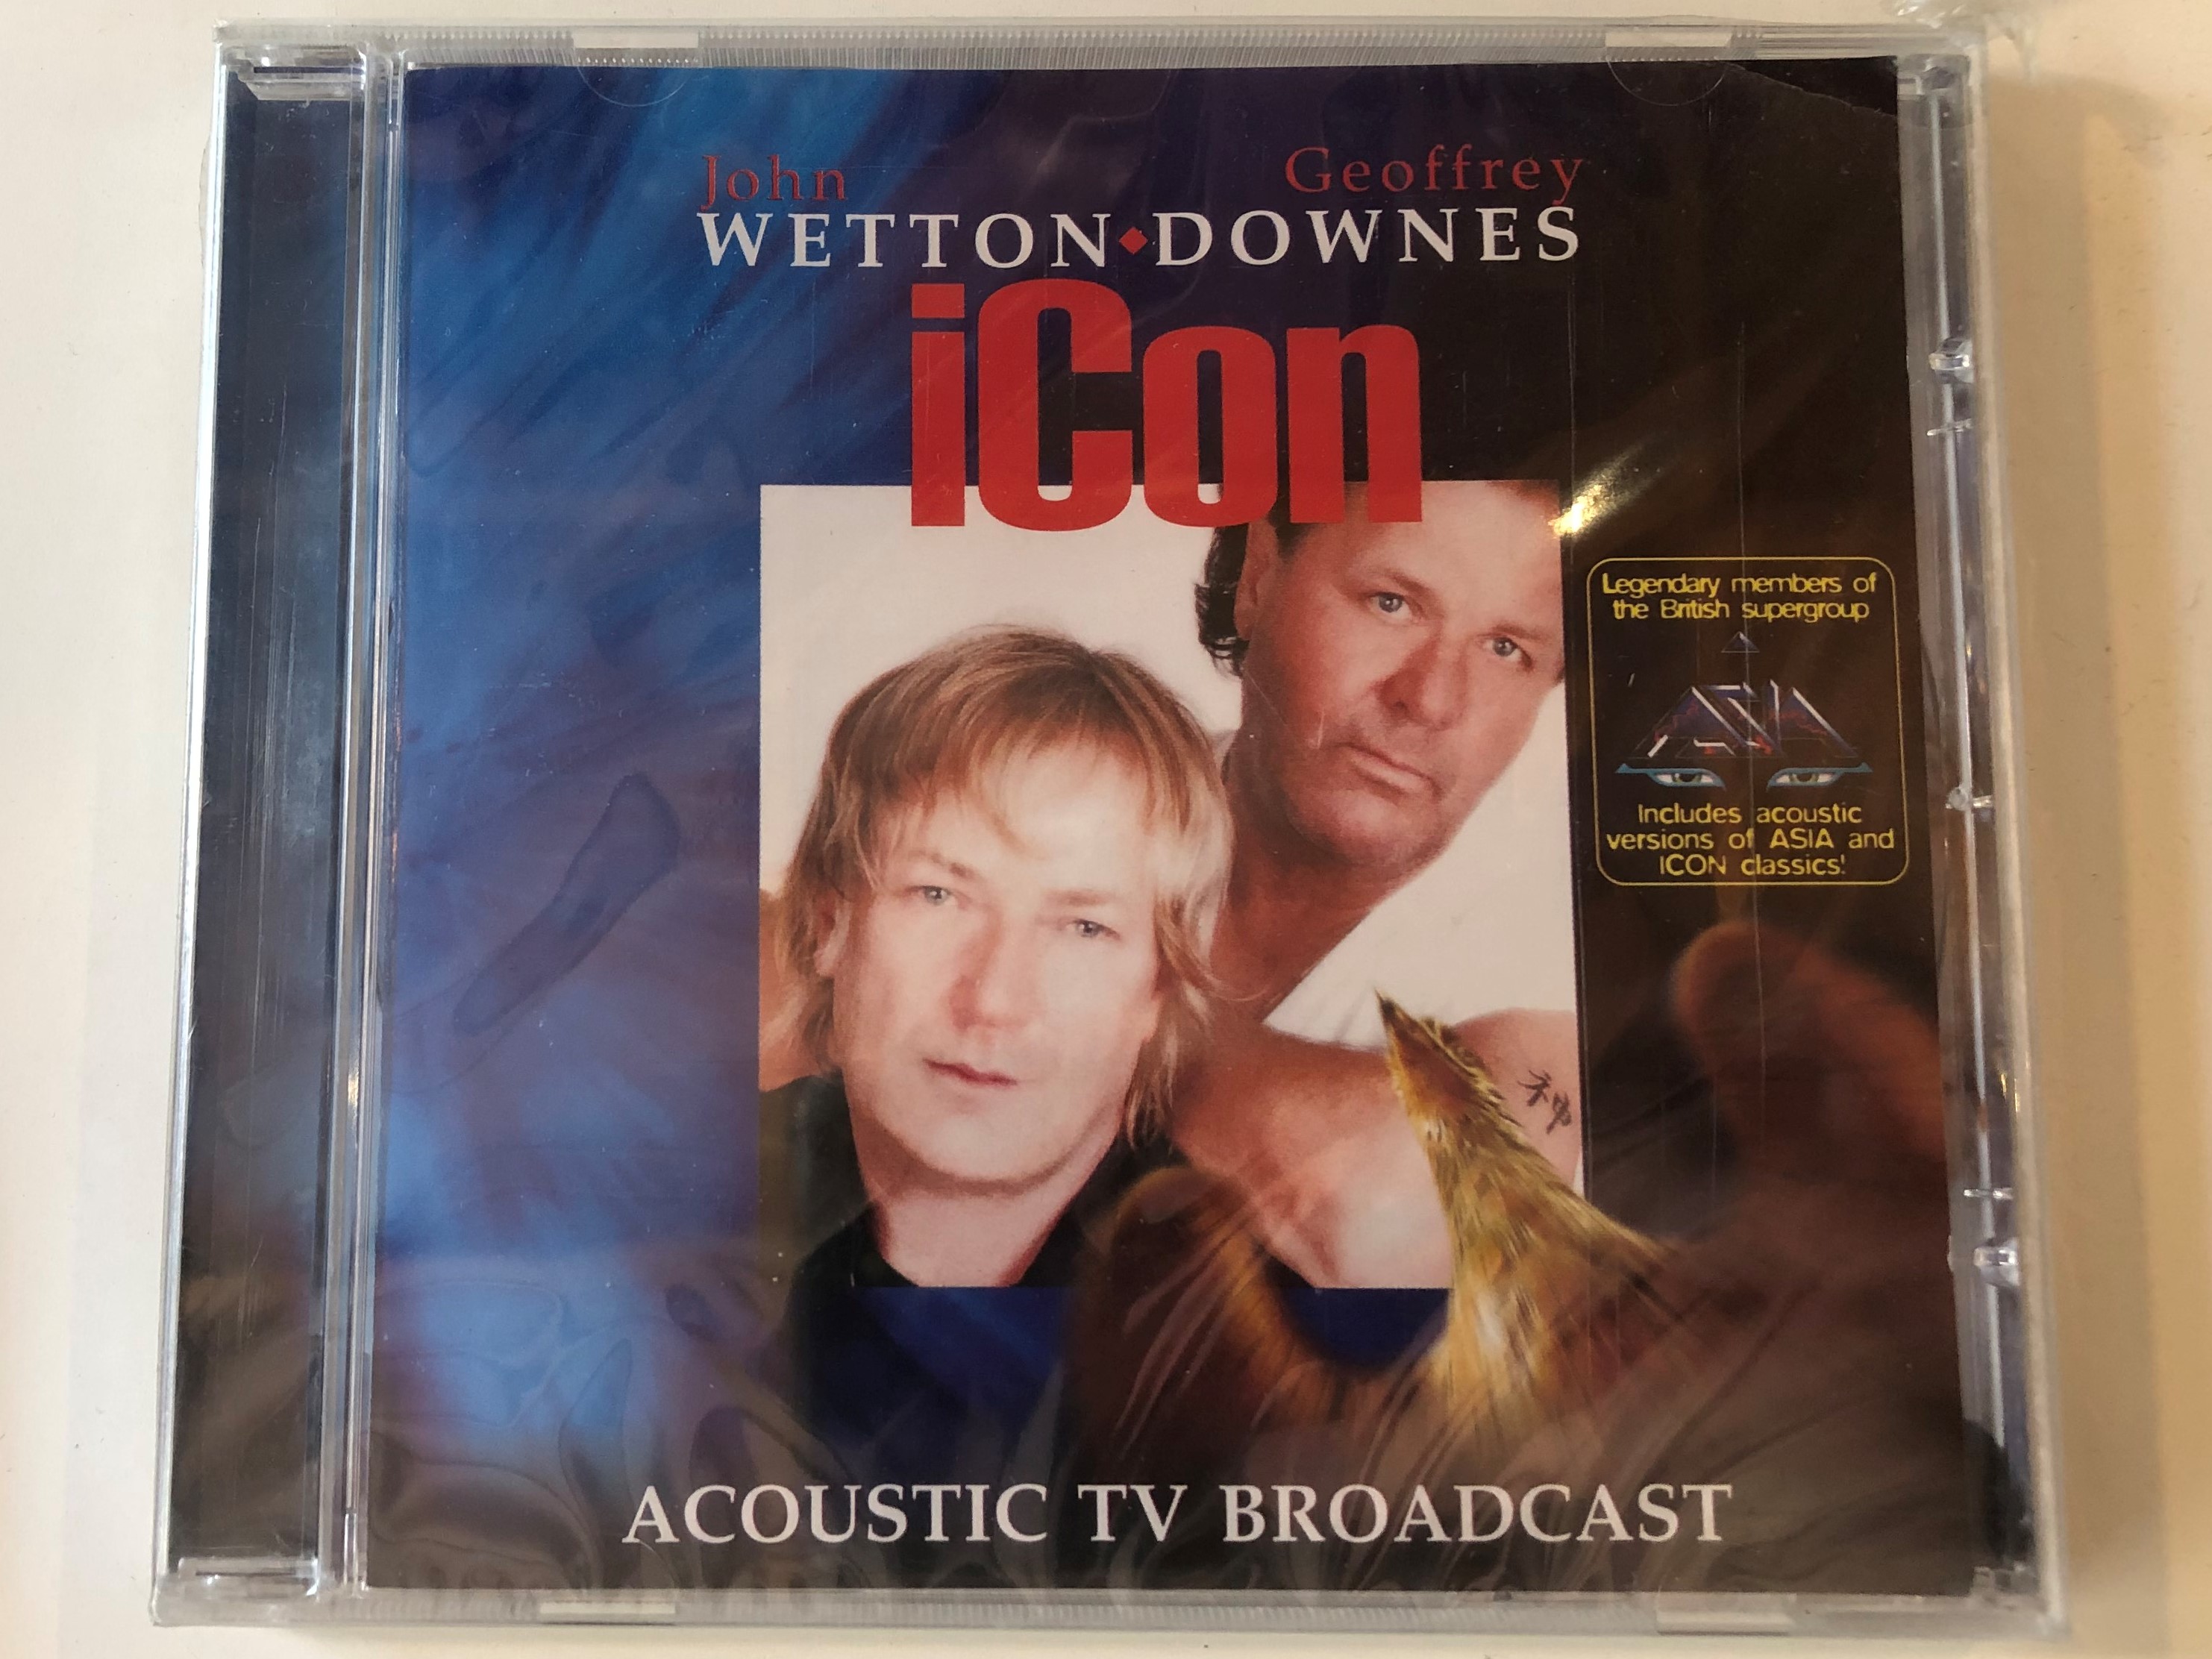 john-wetton-geoffrey-downes-icon-acoustic-tv-broadcast-legendary-members-of-the-british-supergroup-includes-acoustic-versions-of-asia-and-icon-classics-frontiers-records-audio-cd-2006-1-.jpg